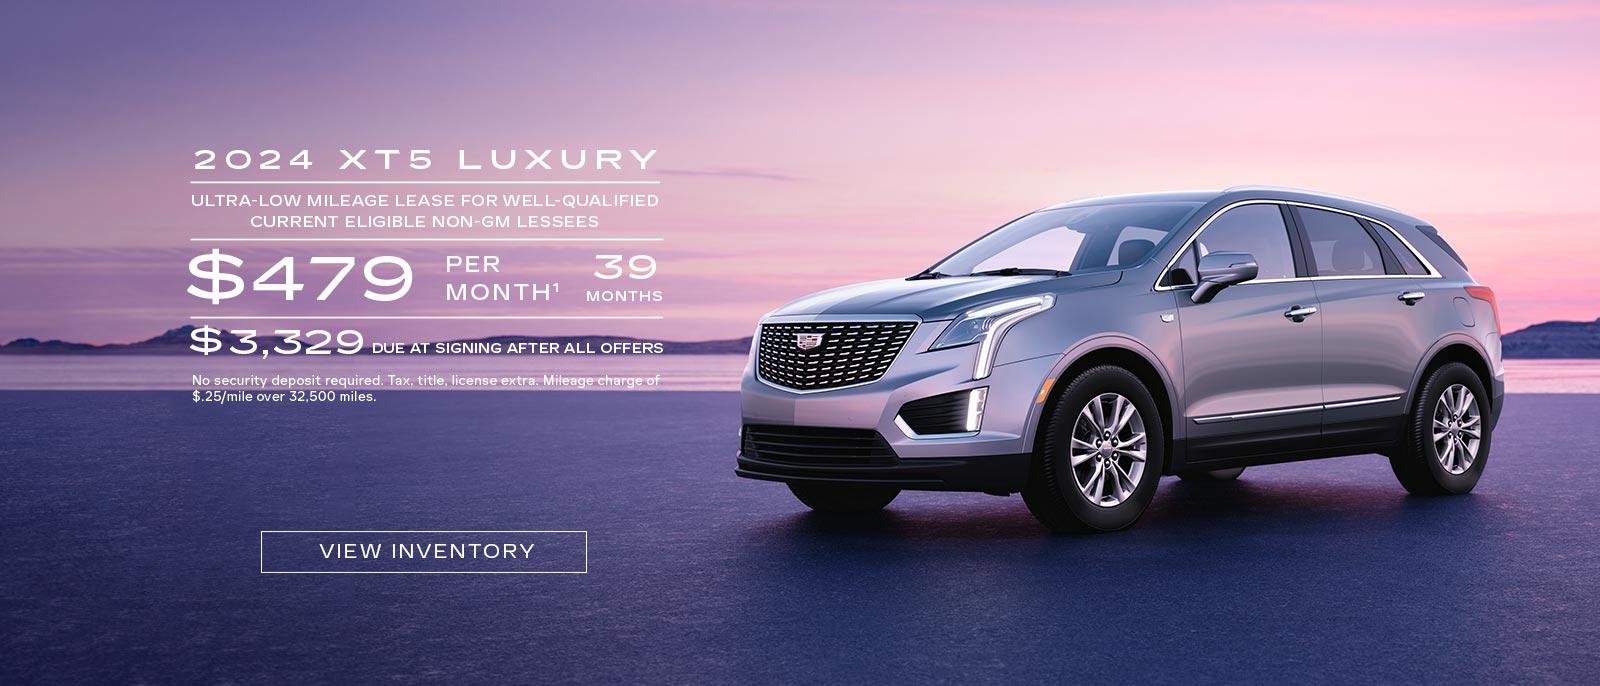 2024 XT5 Luxury. Ultra-low mileage lease for well-qualified current eligible Non-GM Lessees. $479 per month. 39 months. $3.329 due at signing after all offers.